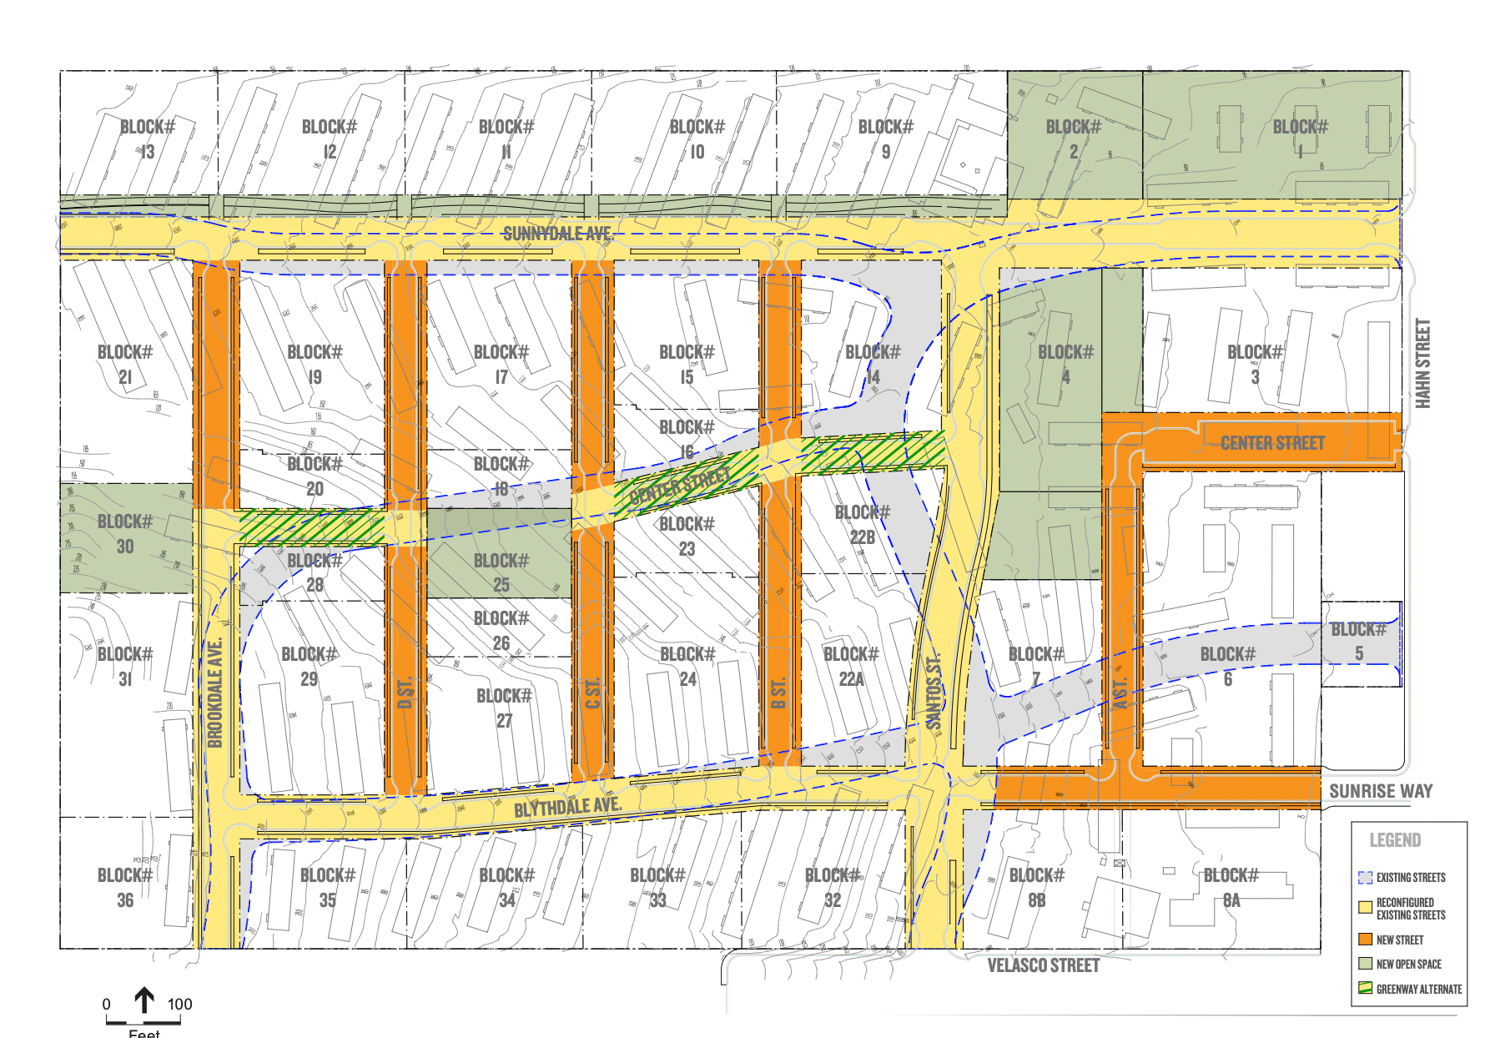 Sunnydale HOPE SF master site plan transposed over the existing structures, development by Related California and Mercy Housing